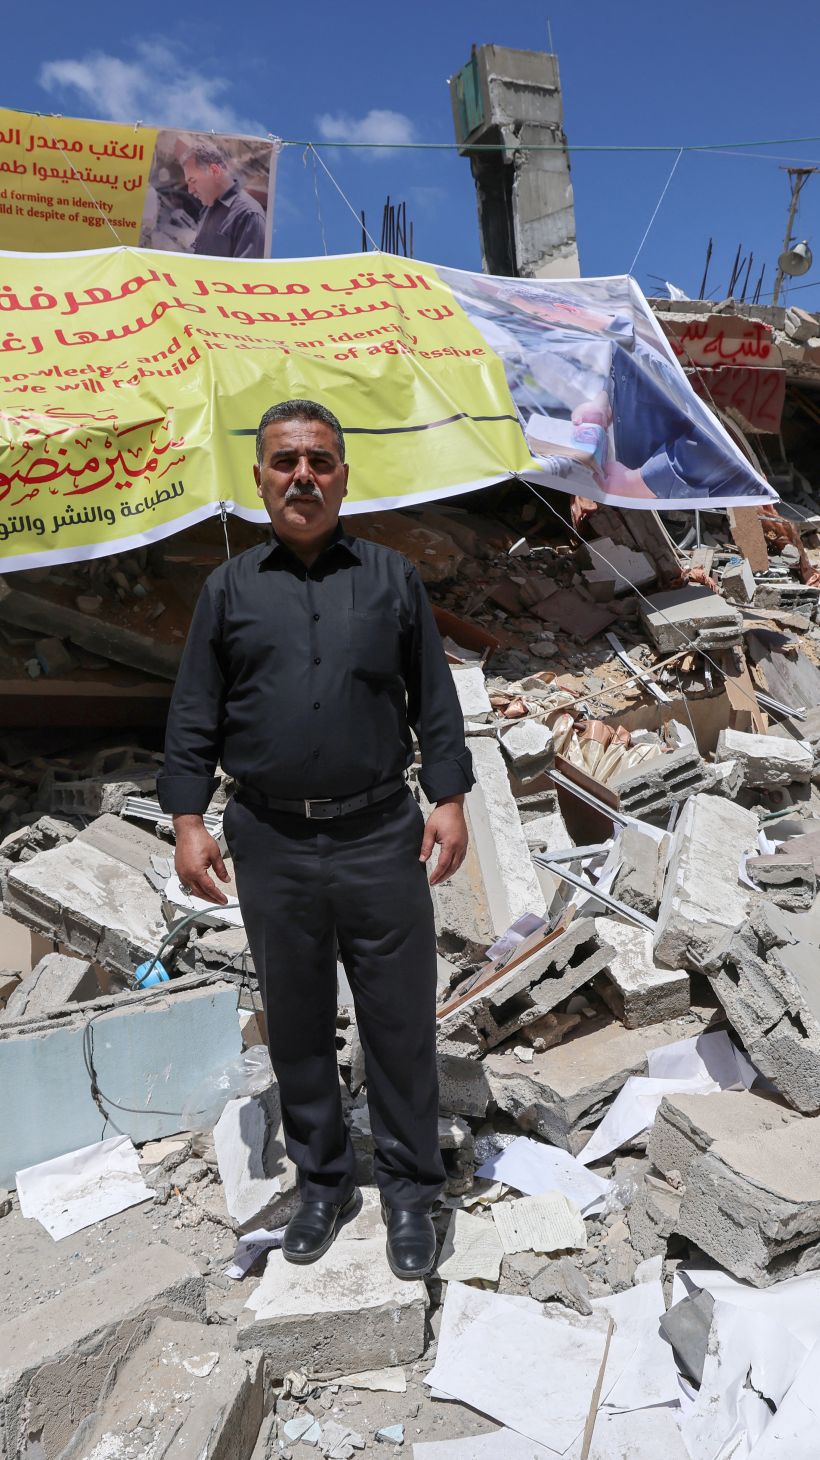 A man stands in the rubble of a destroyed bookstore in Gaza